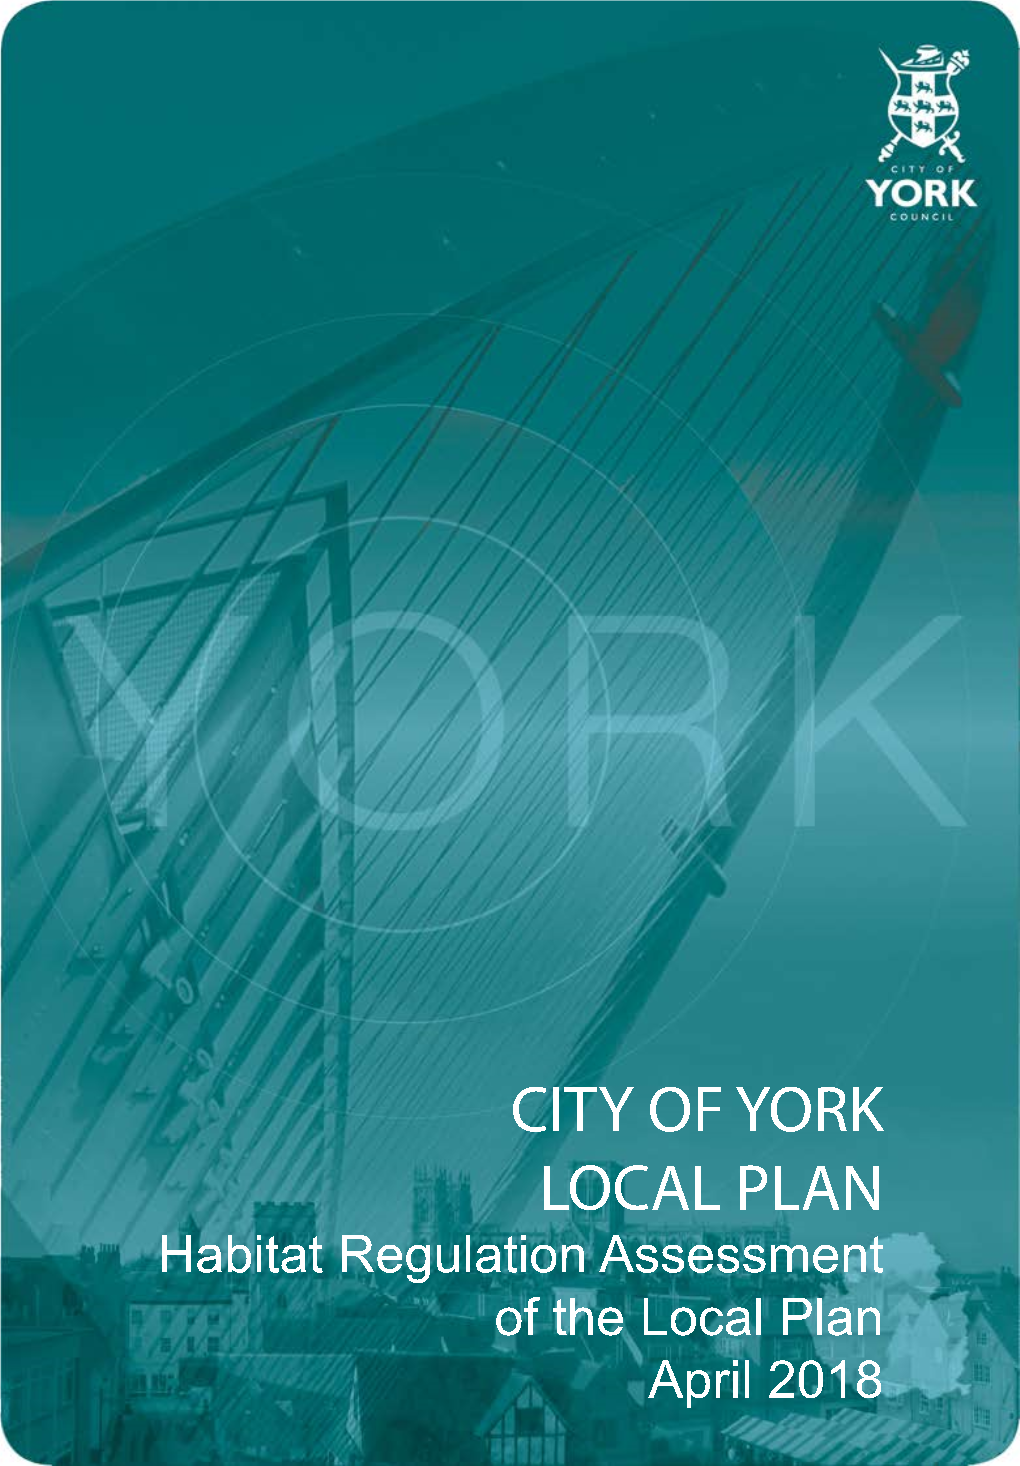 Habitats Regulations Assessment of the City of York Council Local Plan